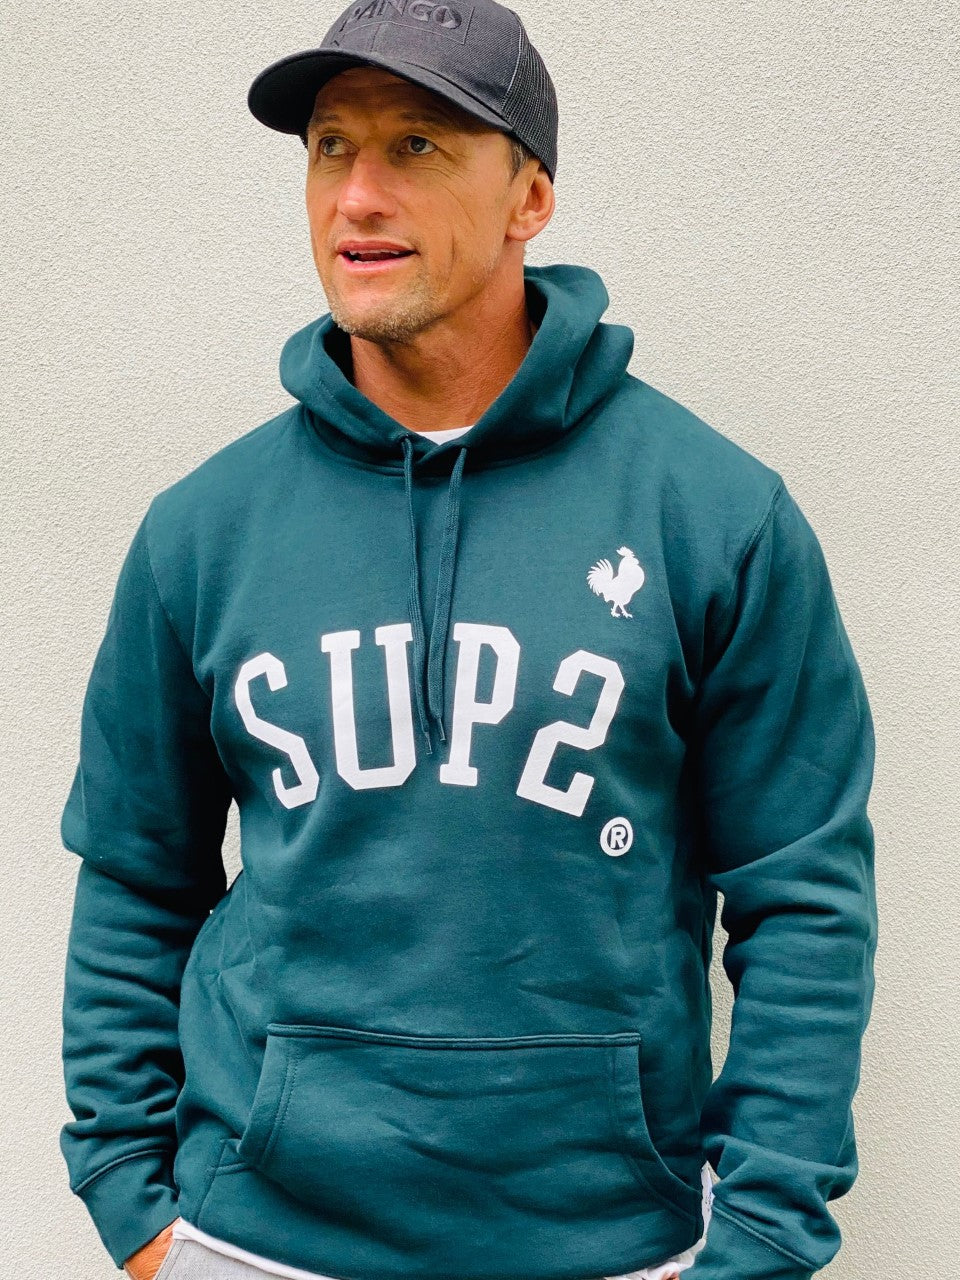 SUP2 'College Coq' Middle Weight Hoodie